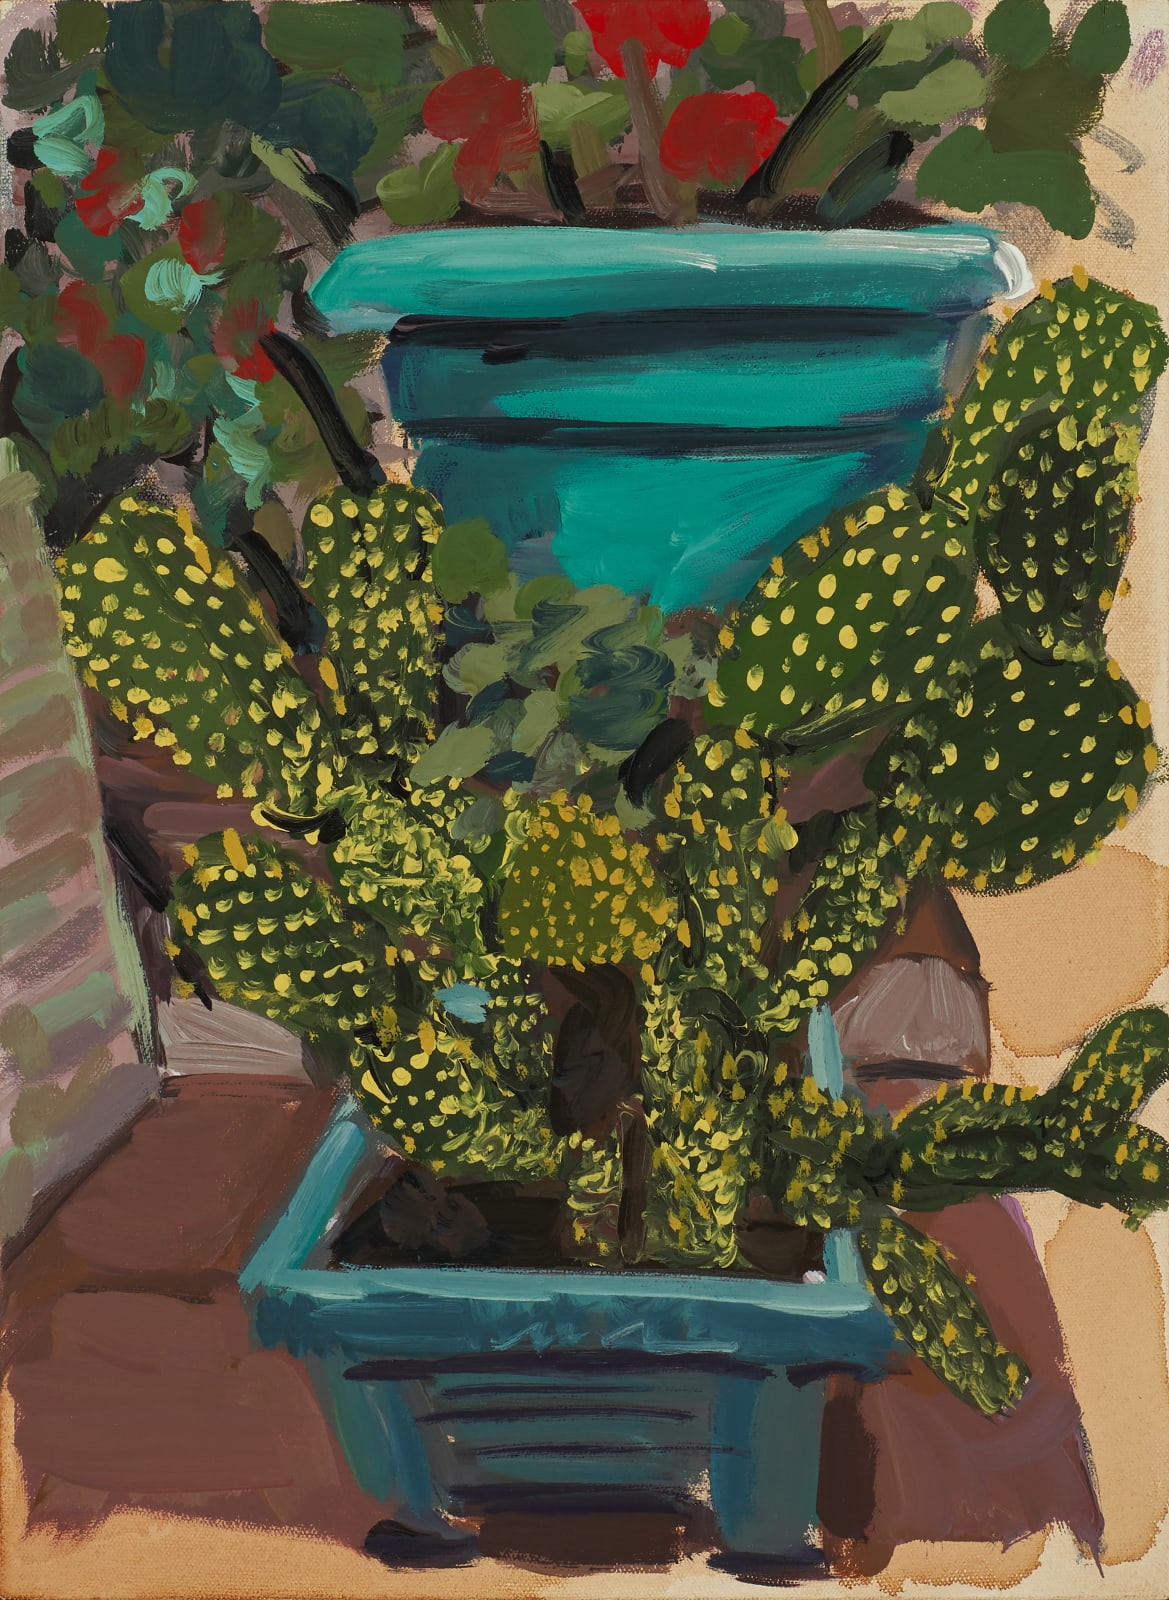 Wangari Mathenge, A Day of Rest (for the Bunny Ear Cactus), 2023